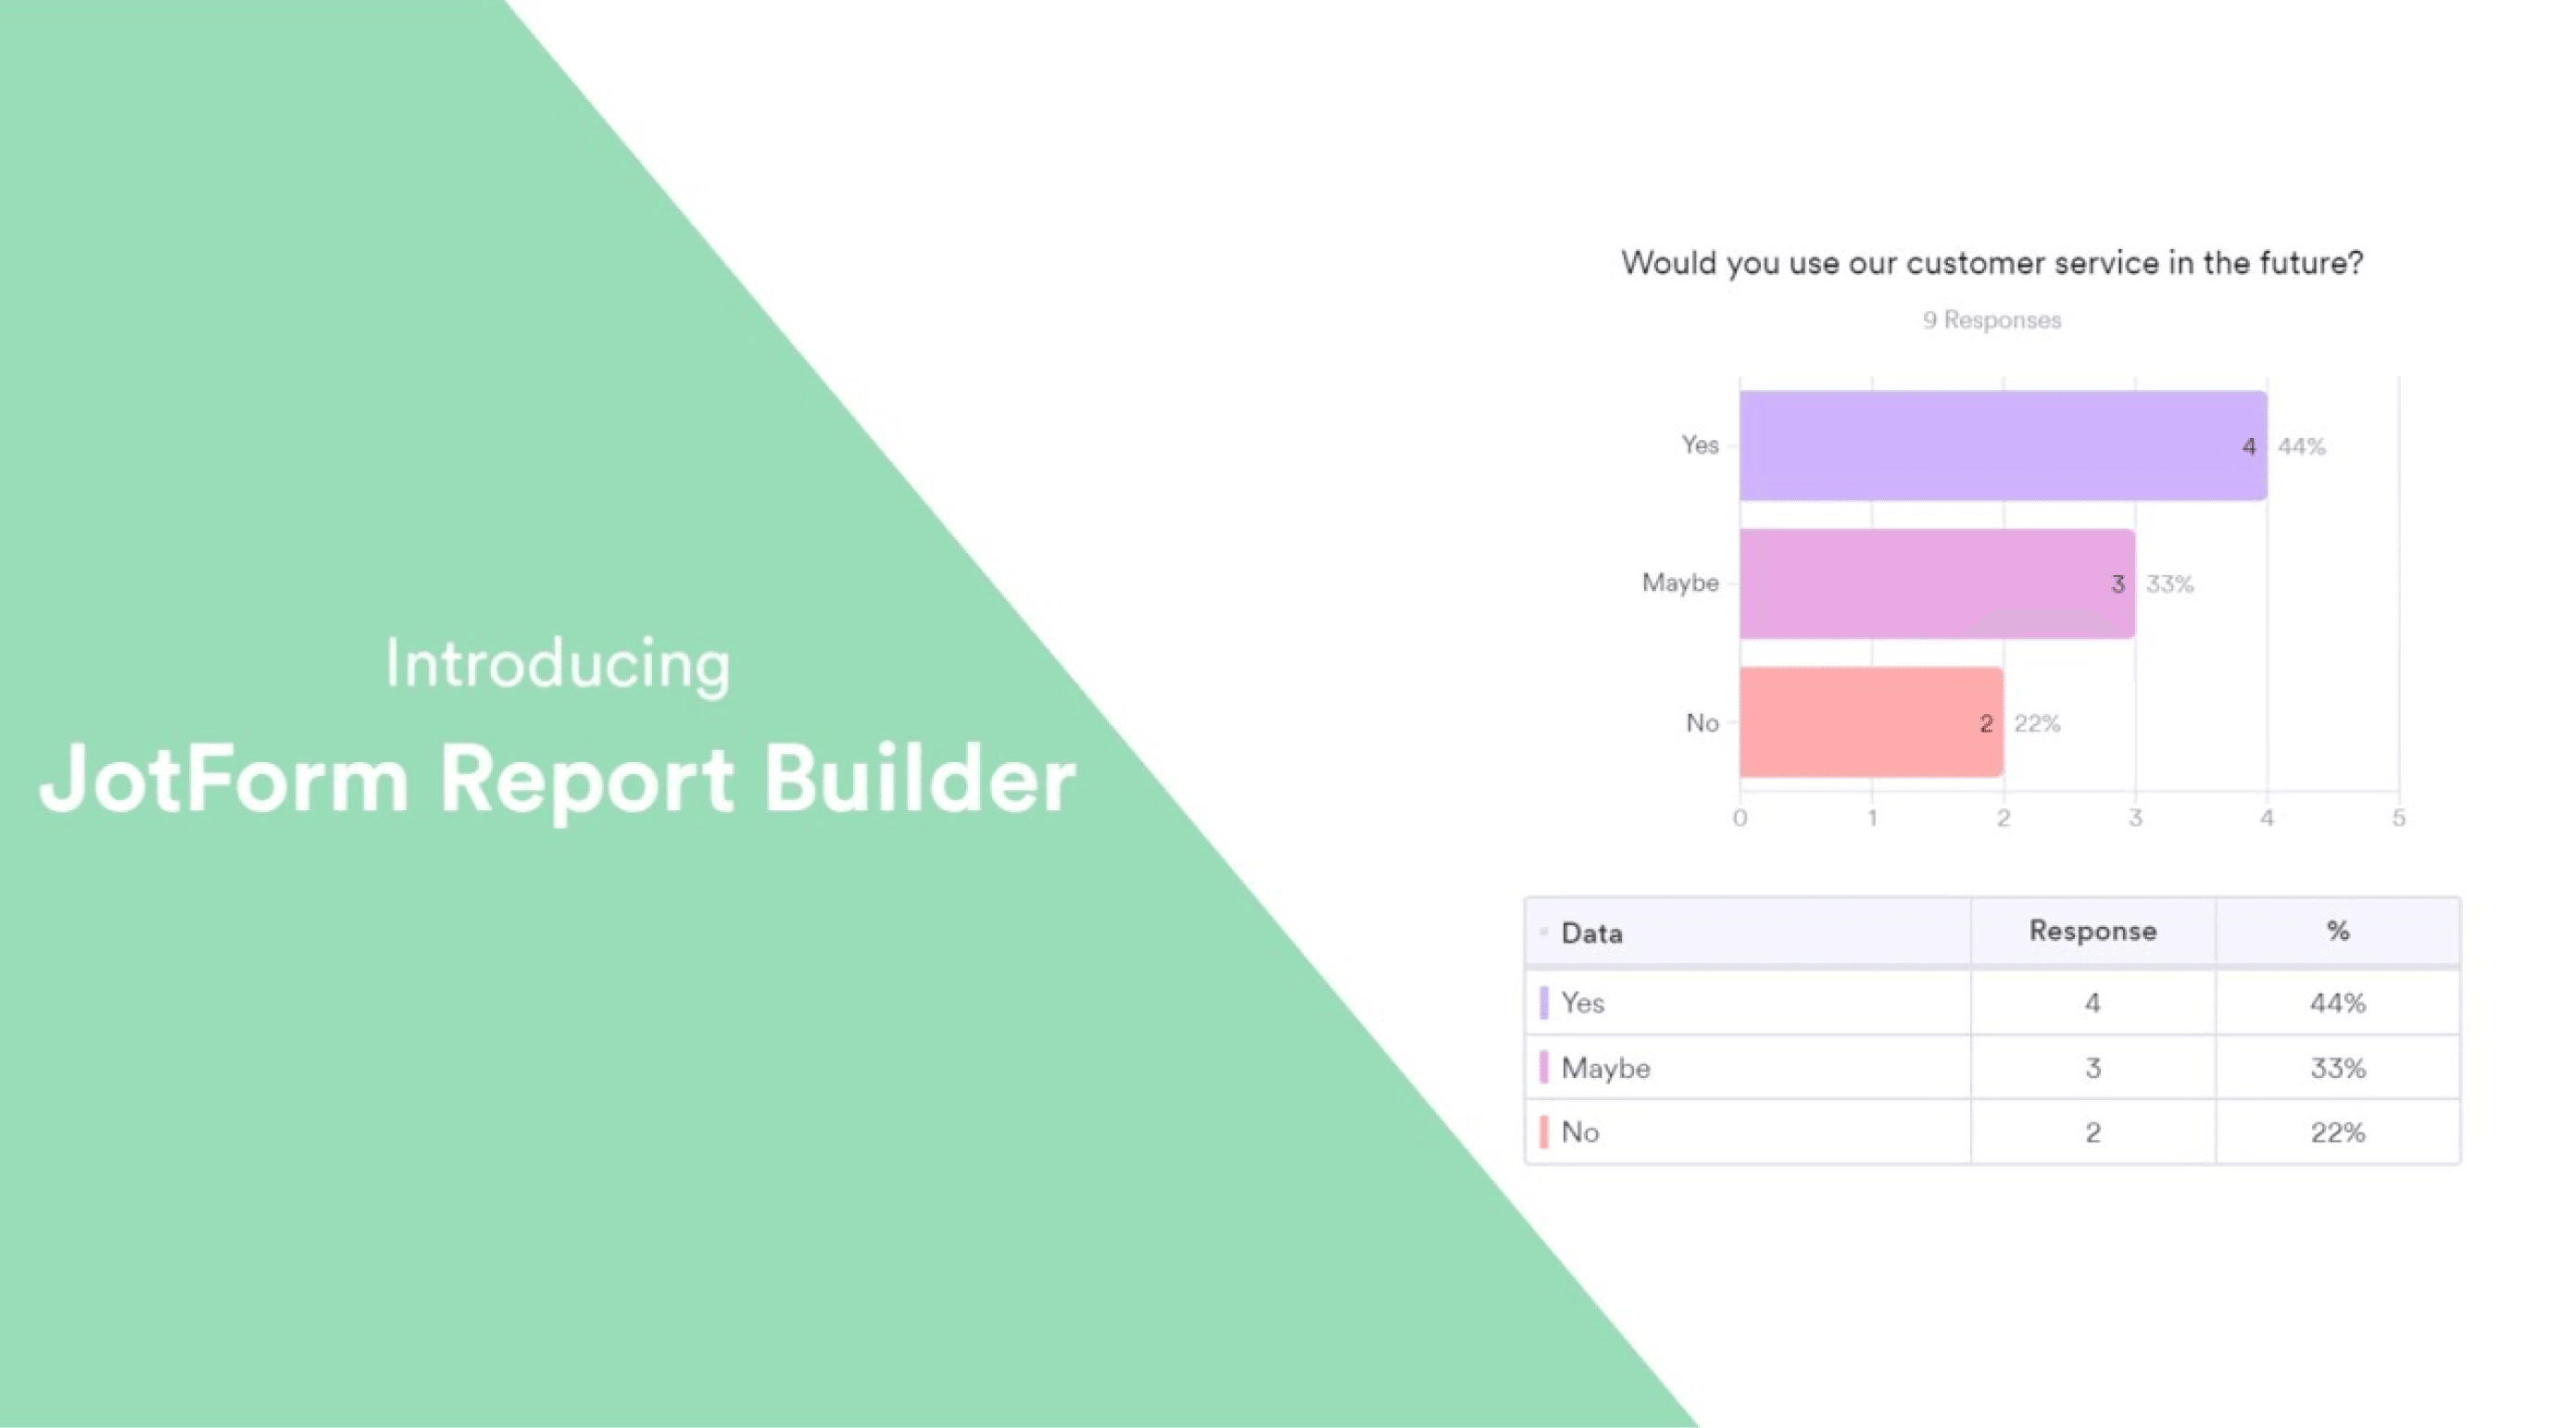 How to use Jotform Report Builder